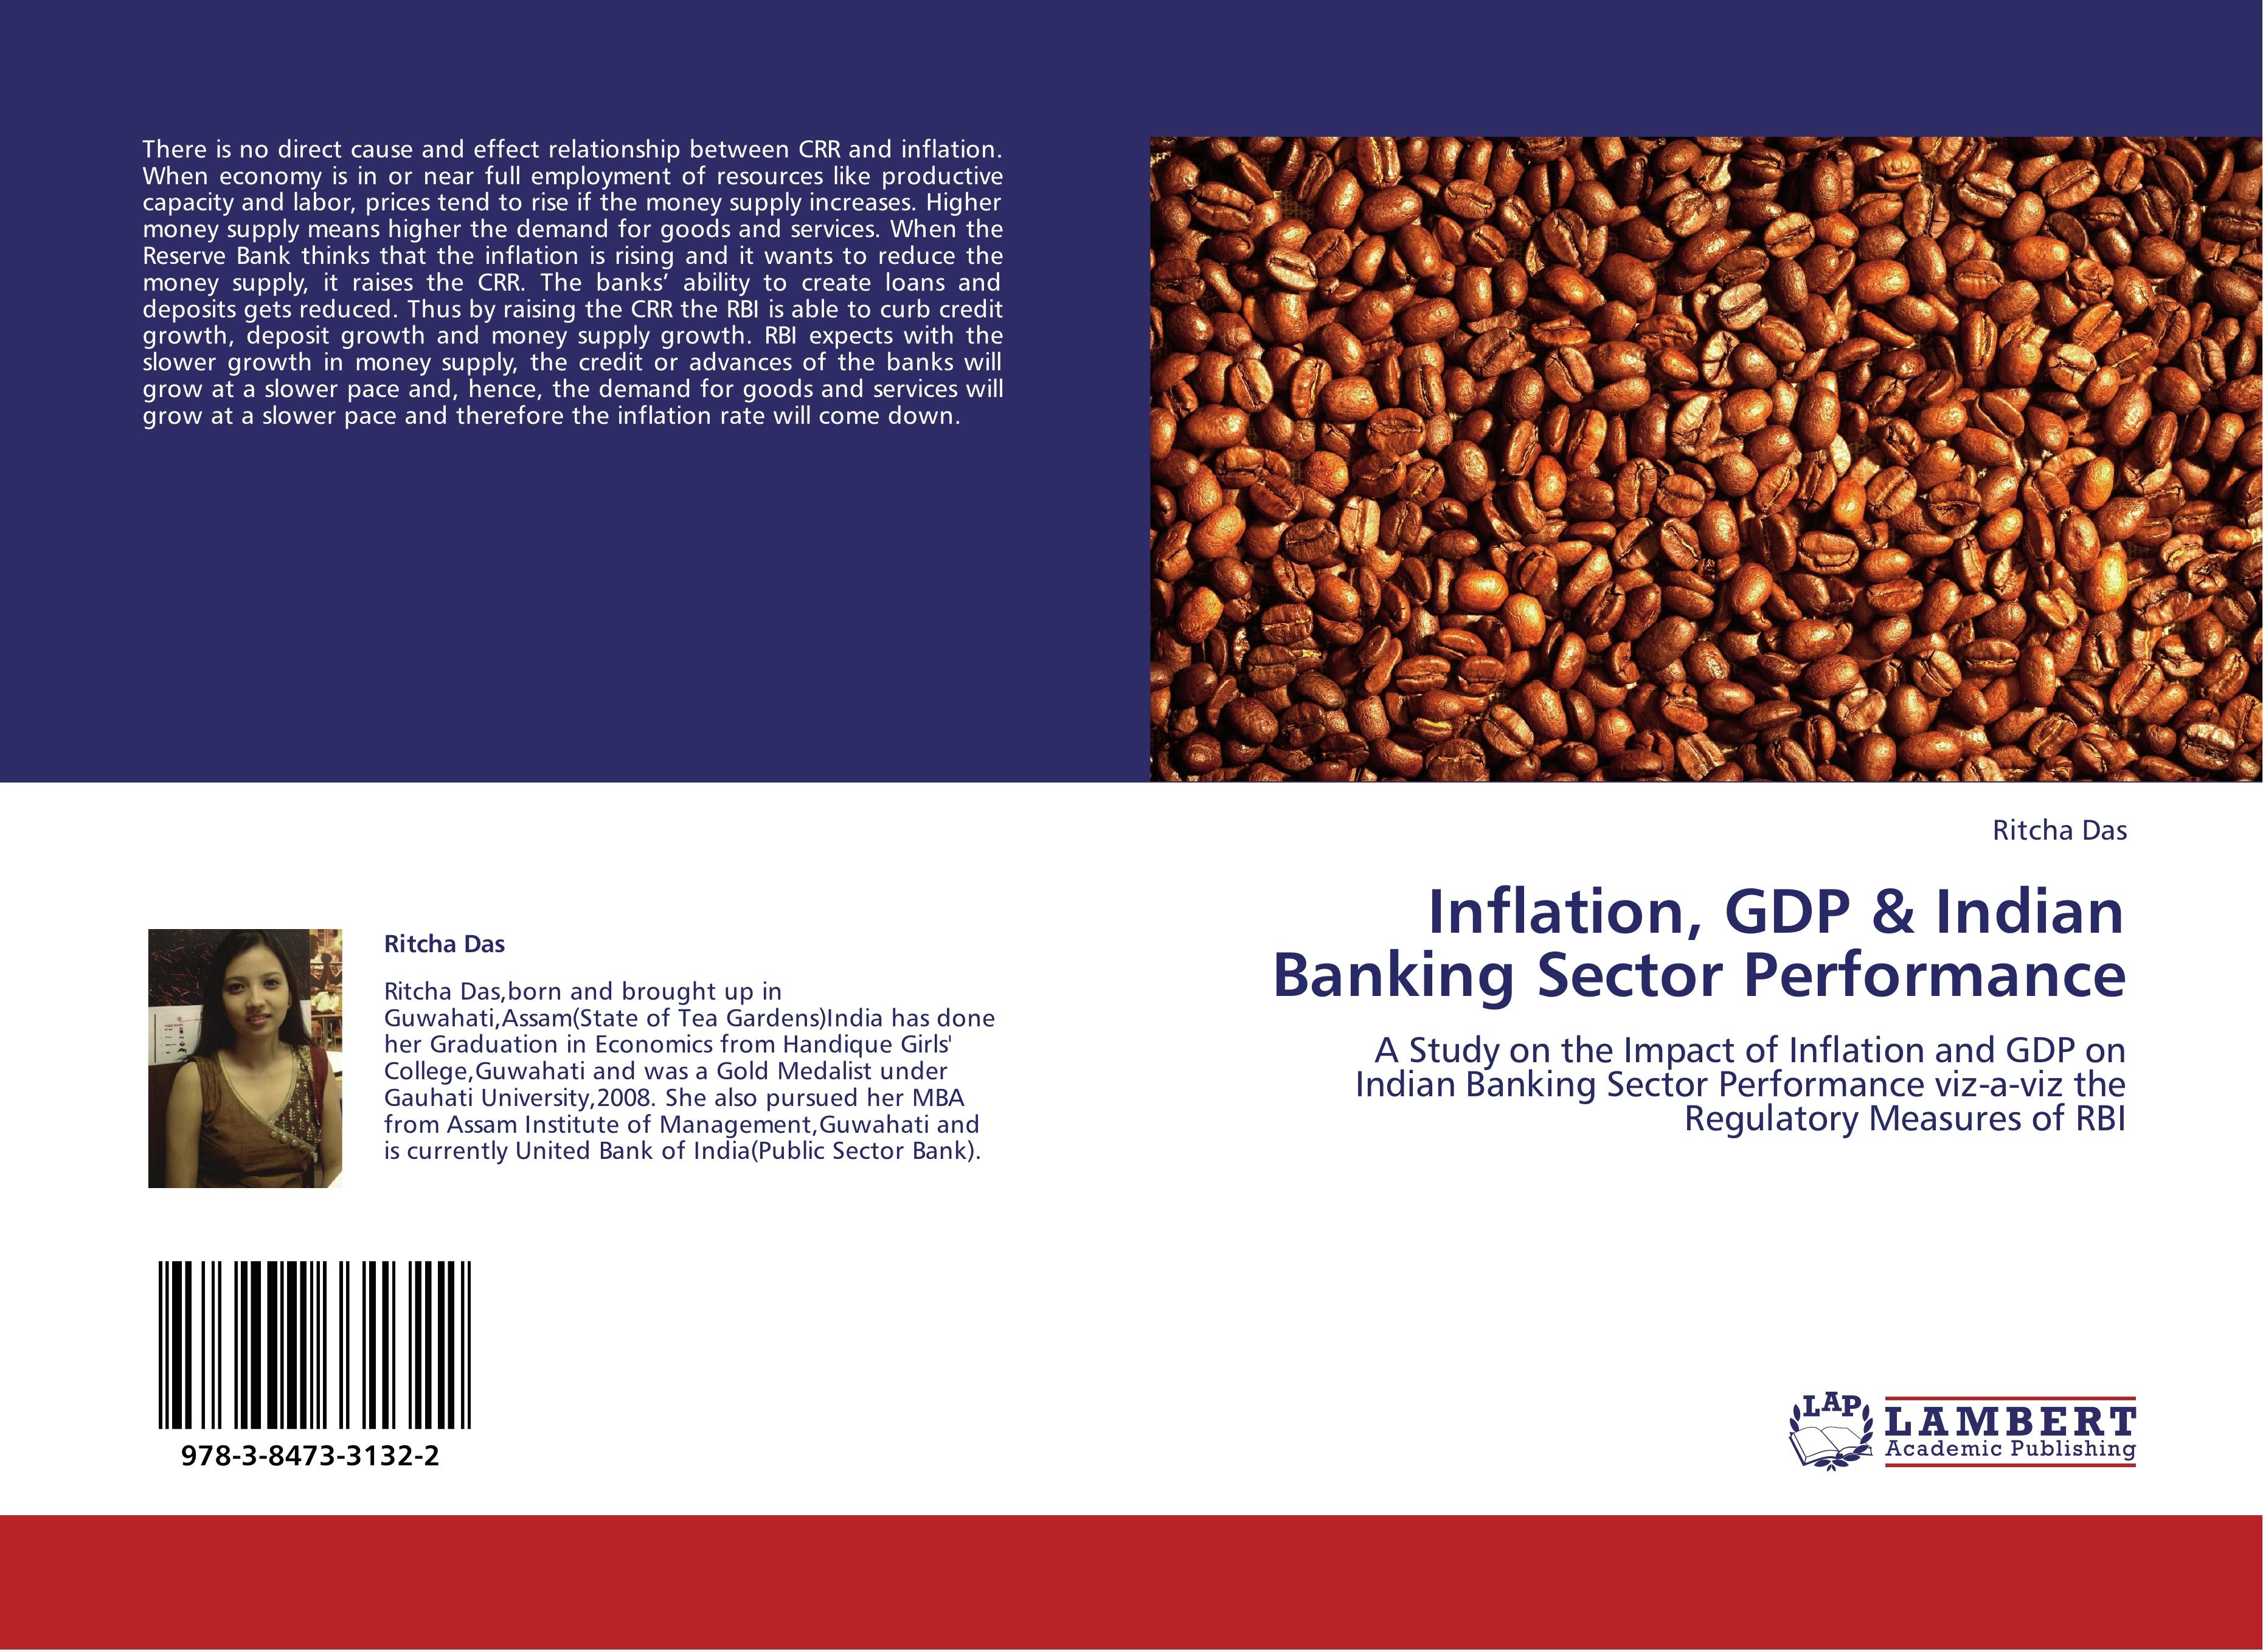 Inflation, GDP & Indian Banking Sector Performance / A Study on the Impact of Inflation and GDP on Indian Banking Sector Performance viz-a-viz the Regulatory Measures of RBI / Ritcha Das / Taschenbuch - Das, Ritcha